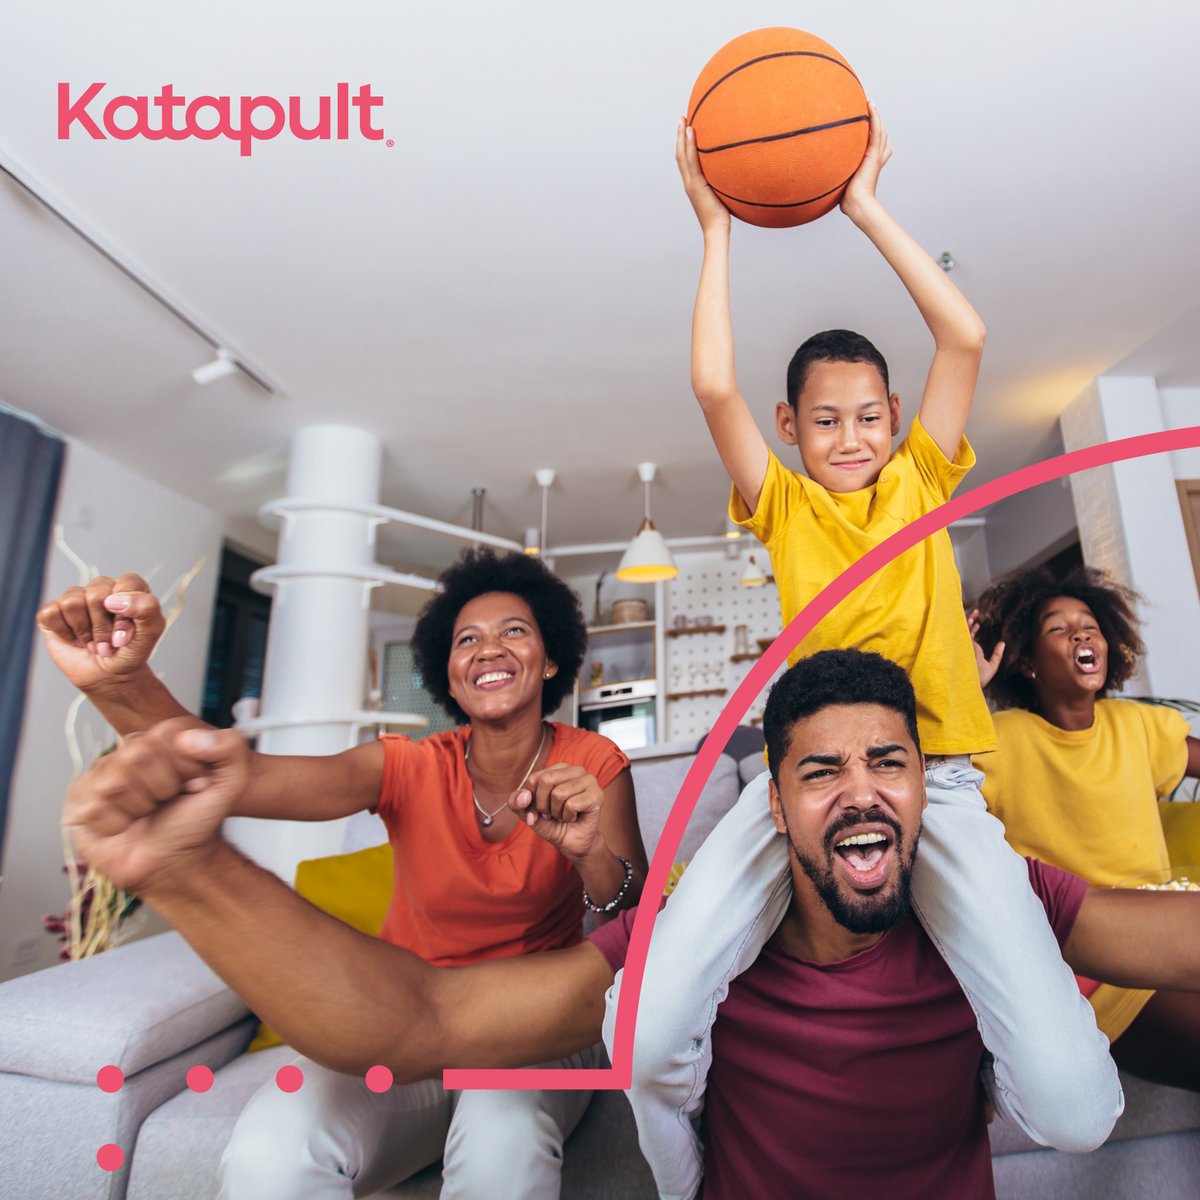 🏀🌟 Dunk into savings with the Katapult app! Score big discounts from your favorite retailers without the need for credit. Pay over time and slam-dunk your way to amazing savings! 🛒💰 hubs.la/Q02pS3dh0 #Katapult #Savings #nocredit